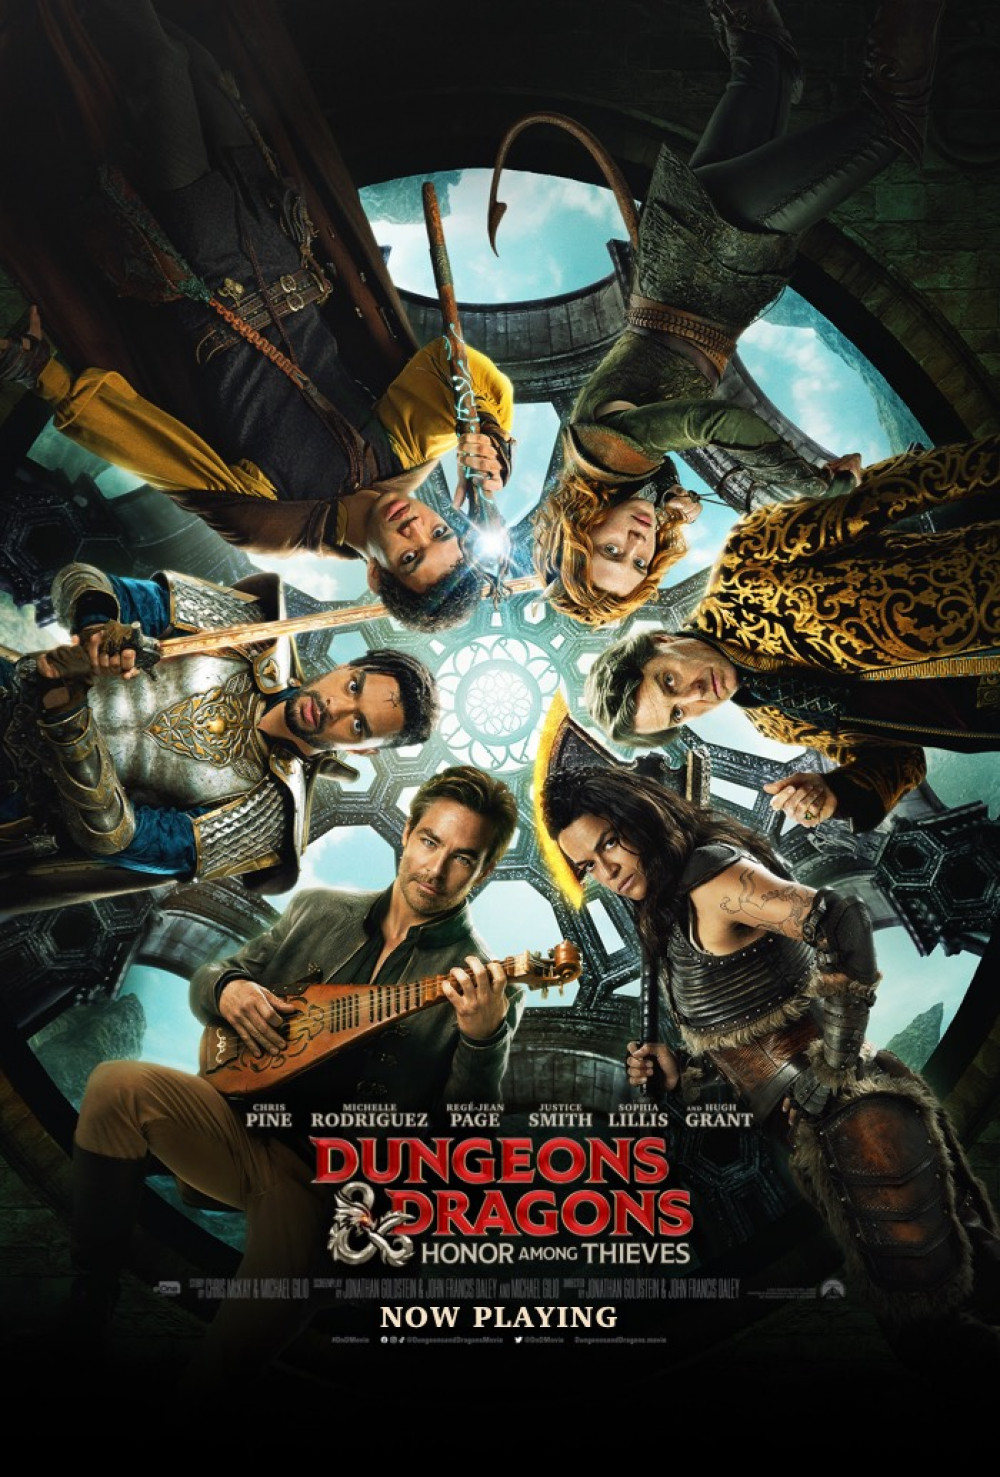 Dungeons & Dragons: Honour Among Thieves (12A)